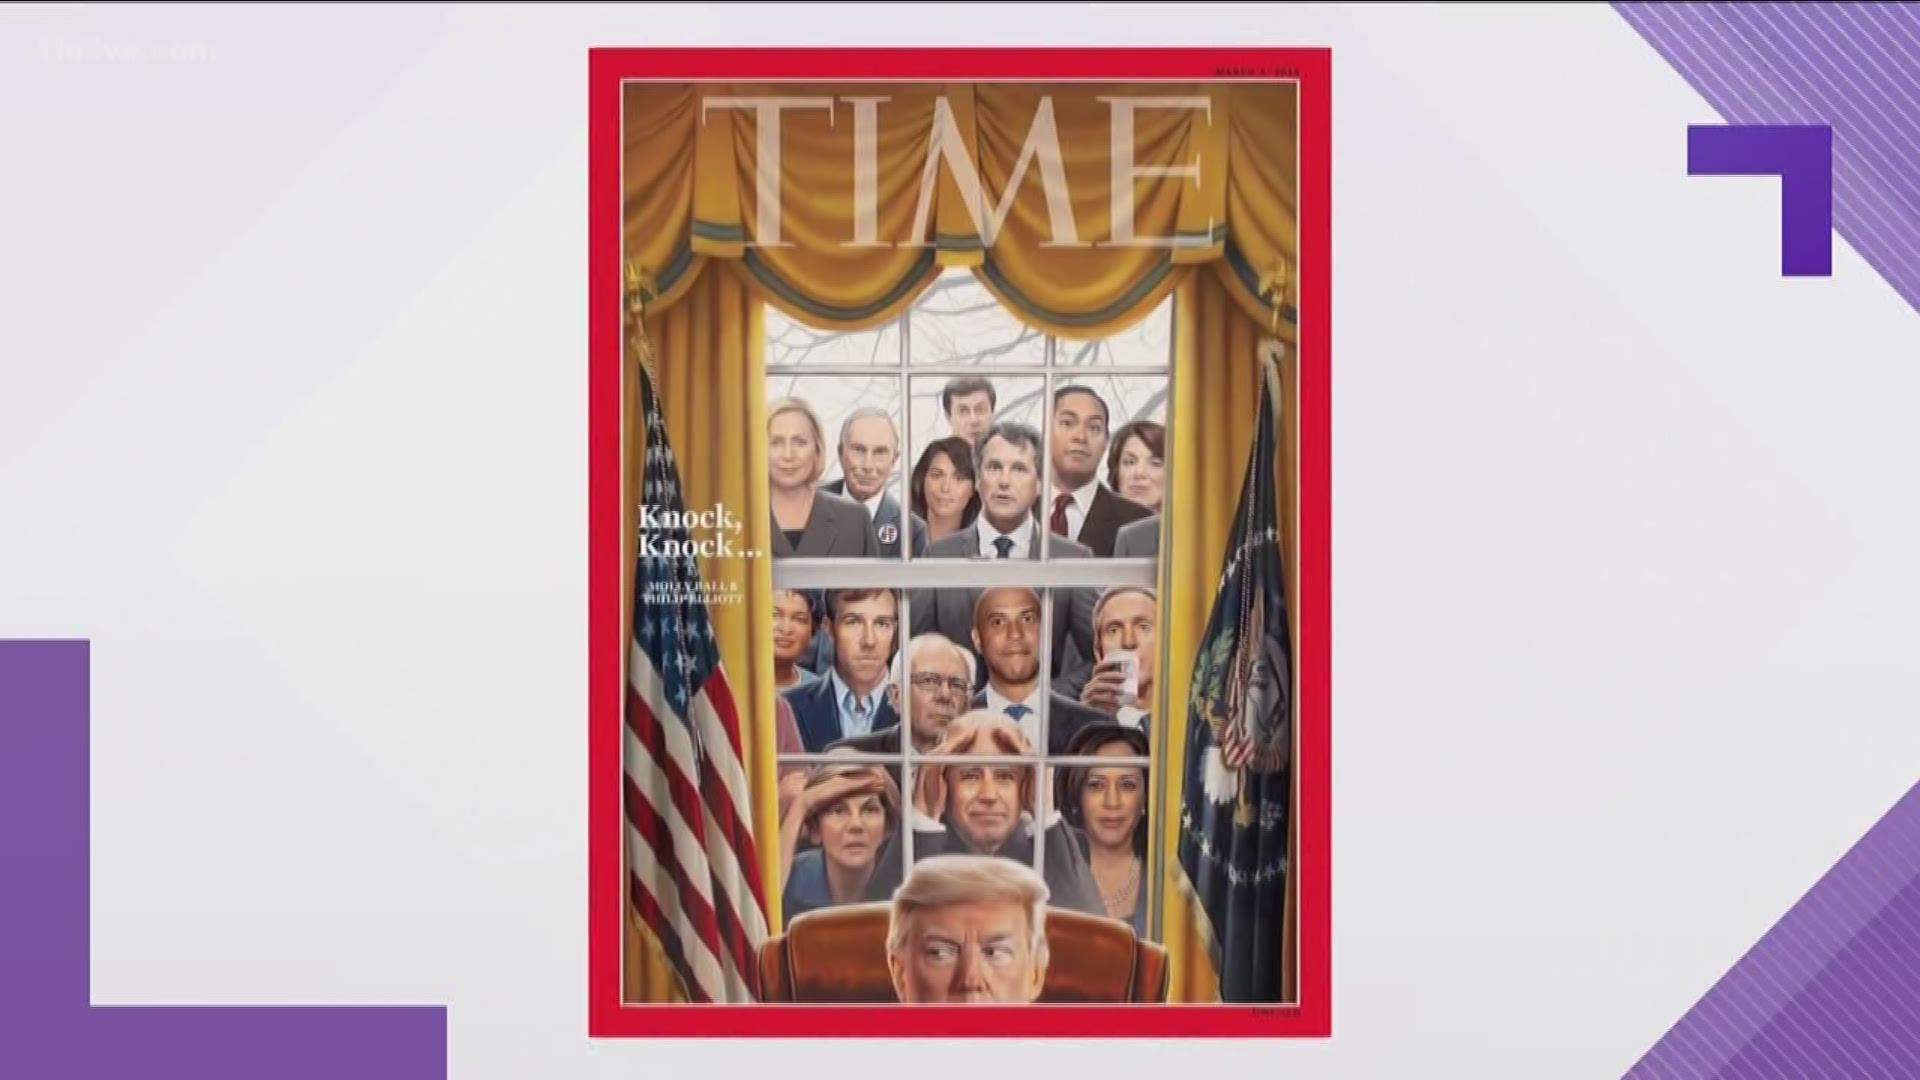 TIME tweeted the magazine cover.